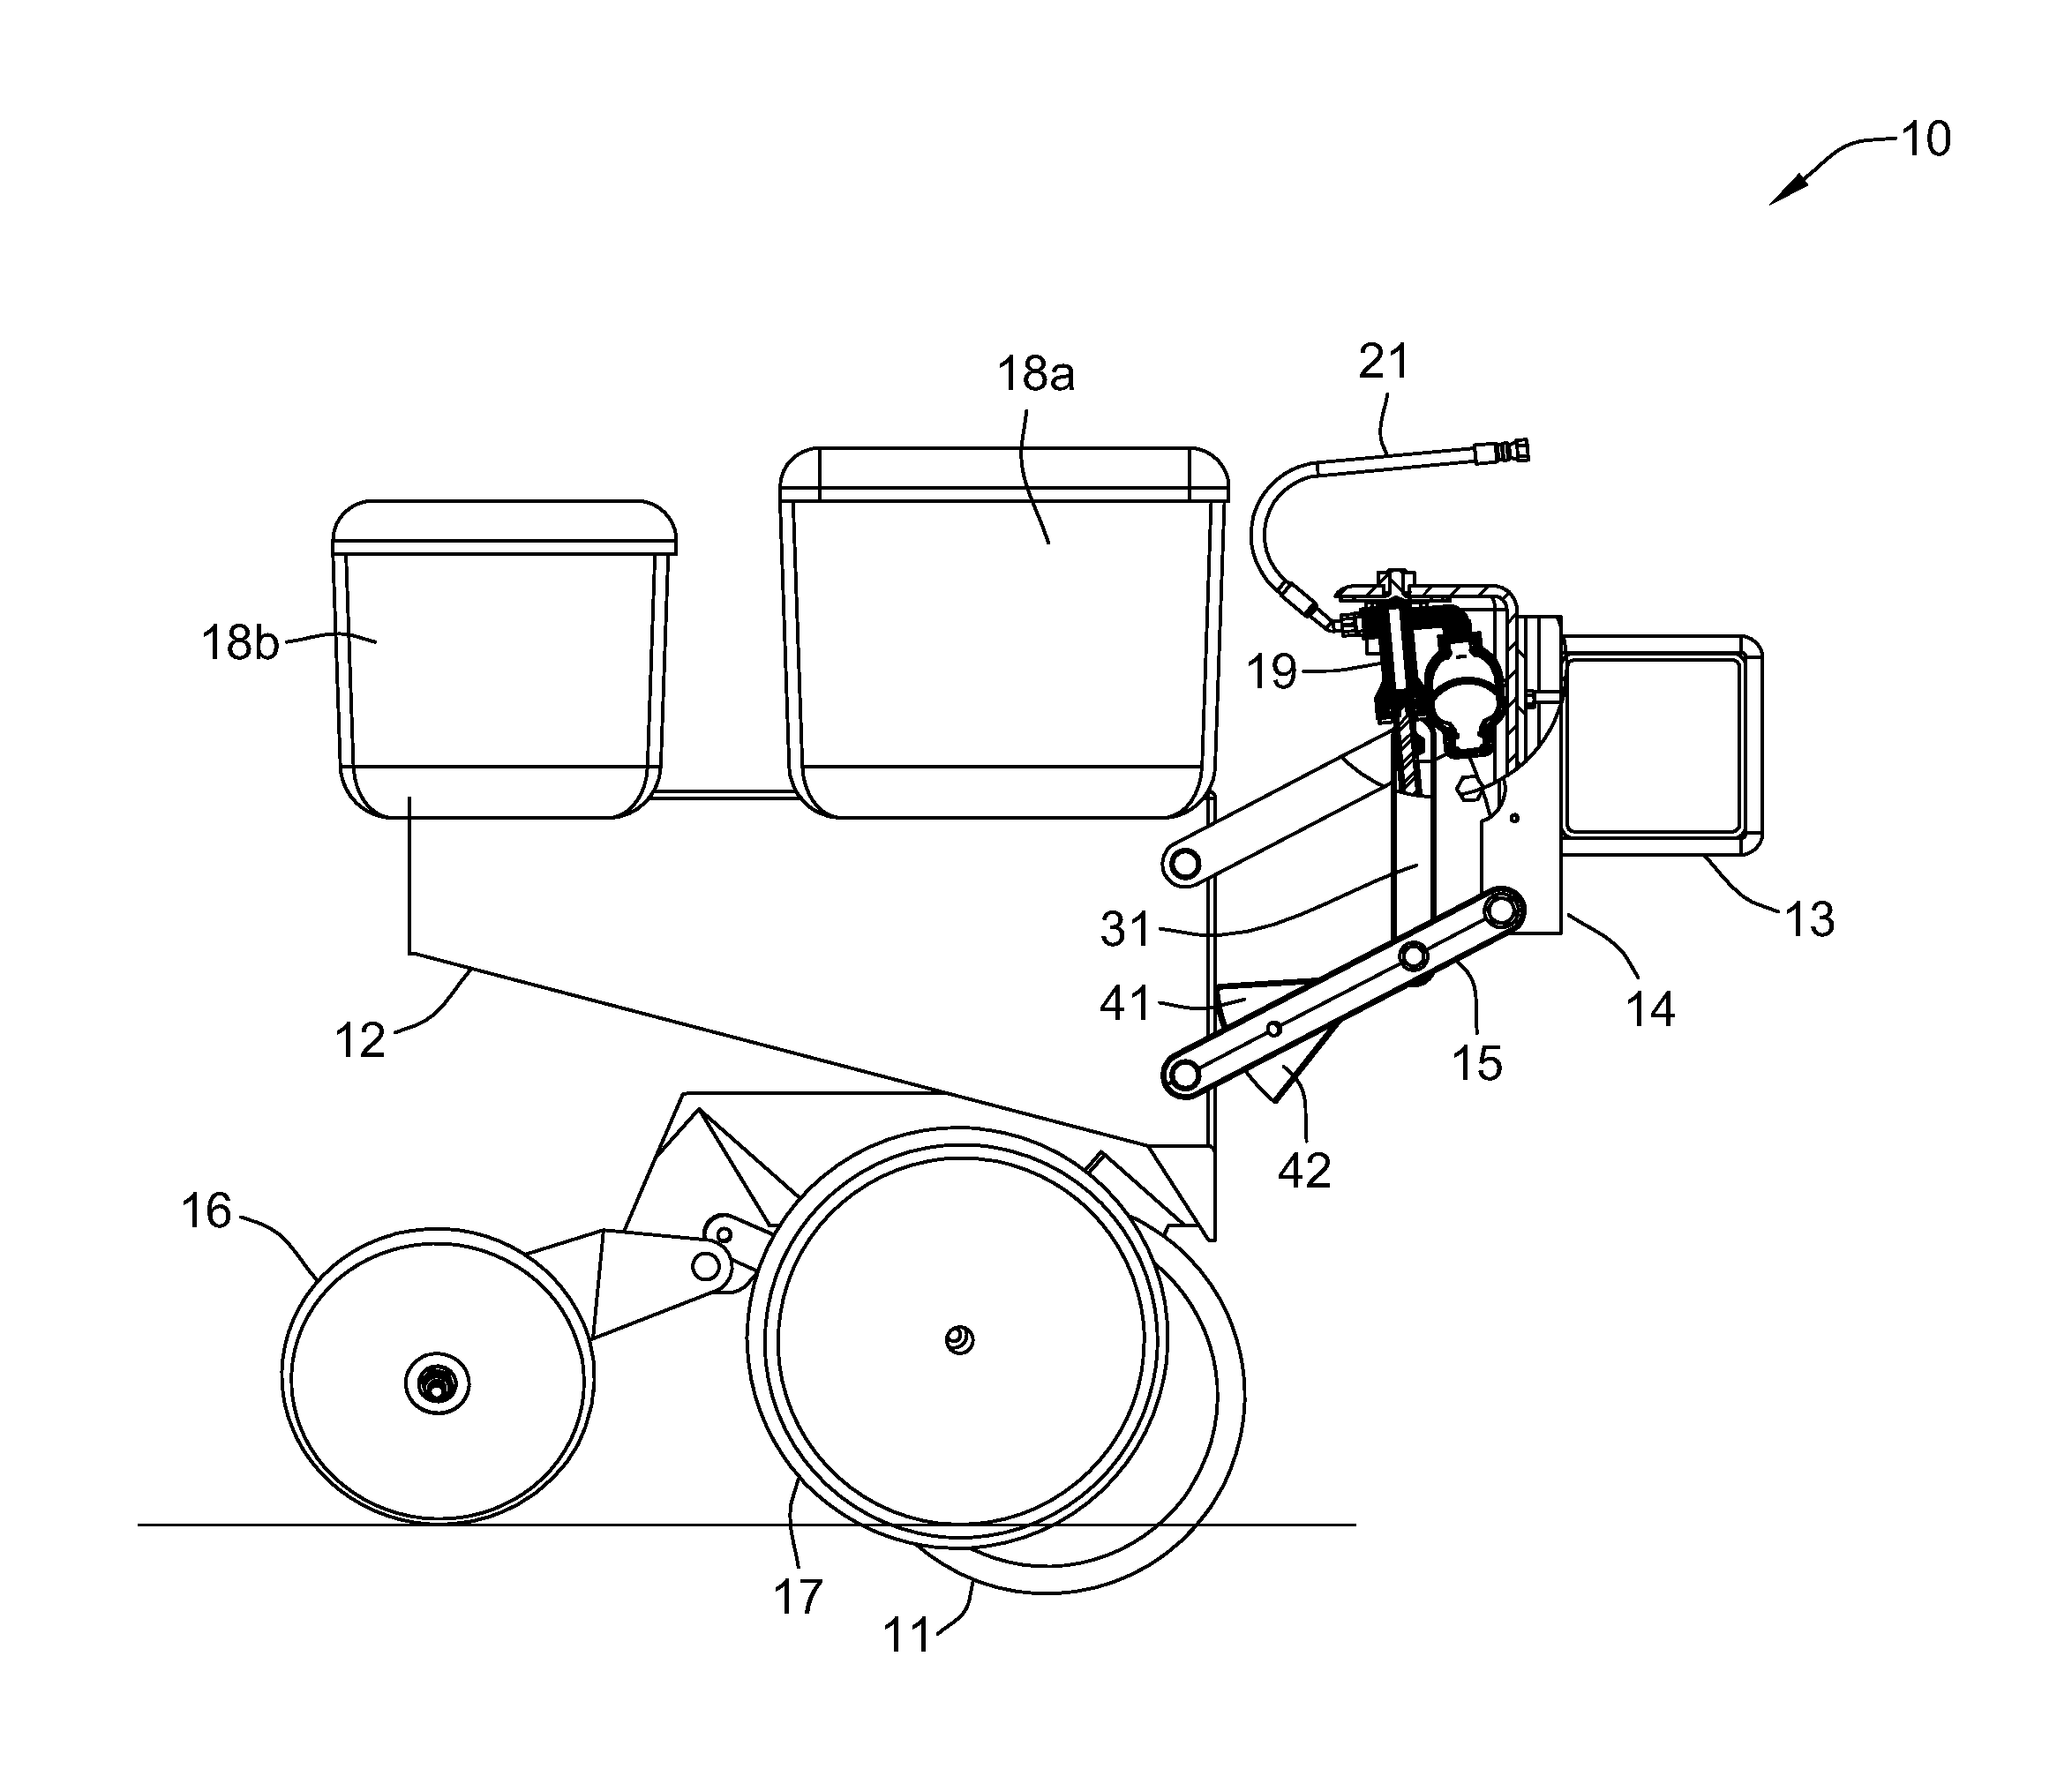 Hydraulic down pressure control system for closing wheels of an agricultural implement